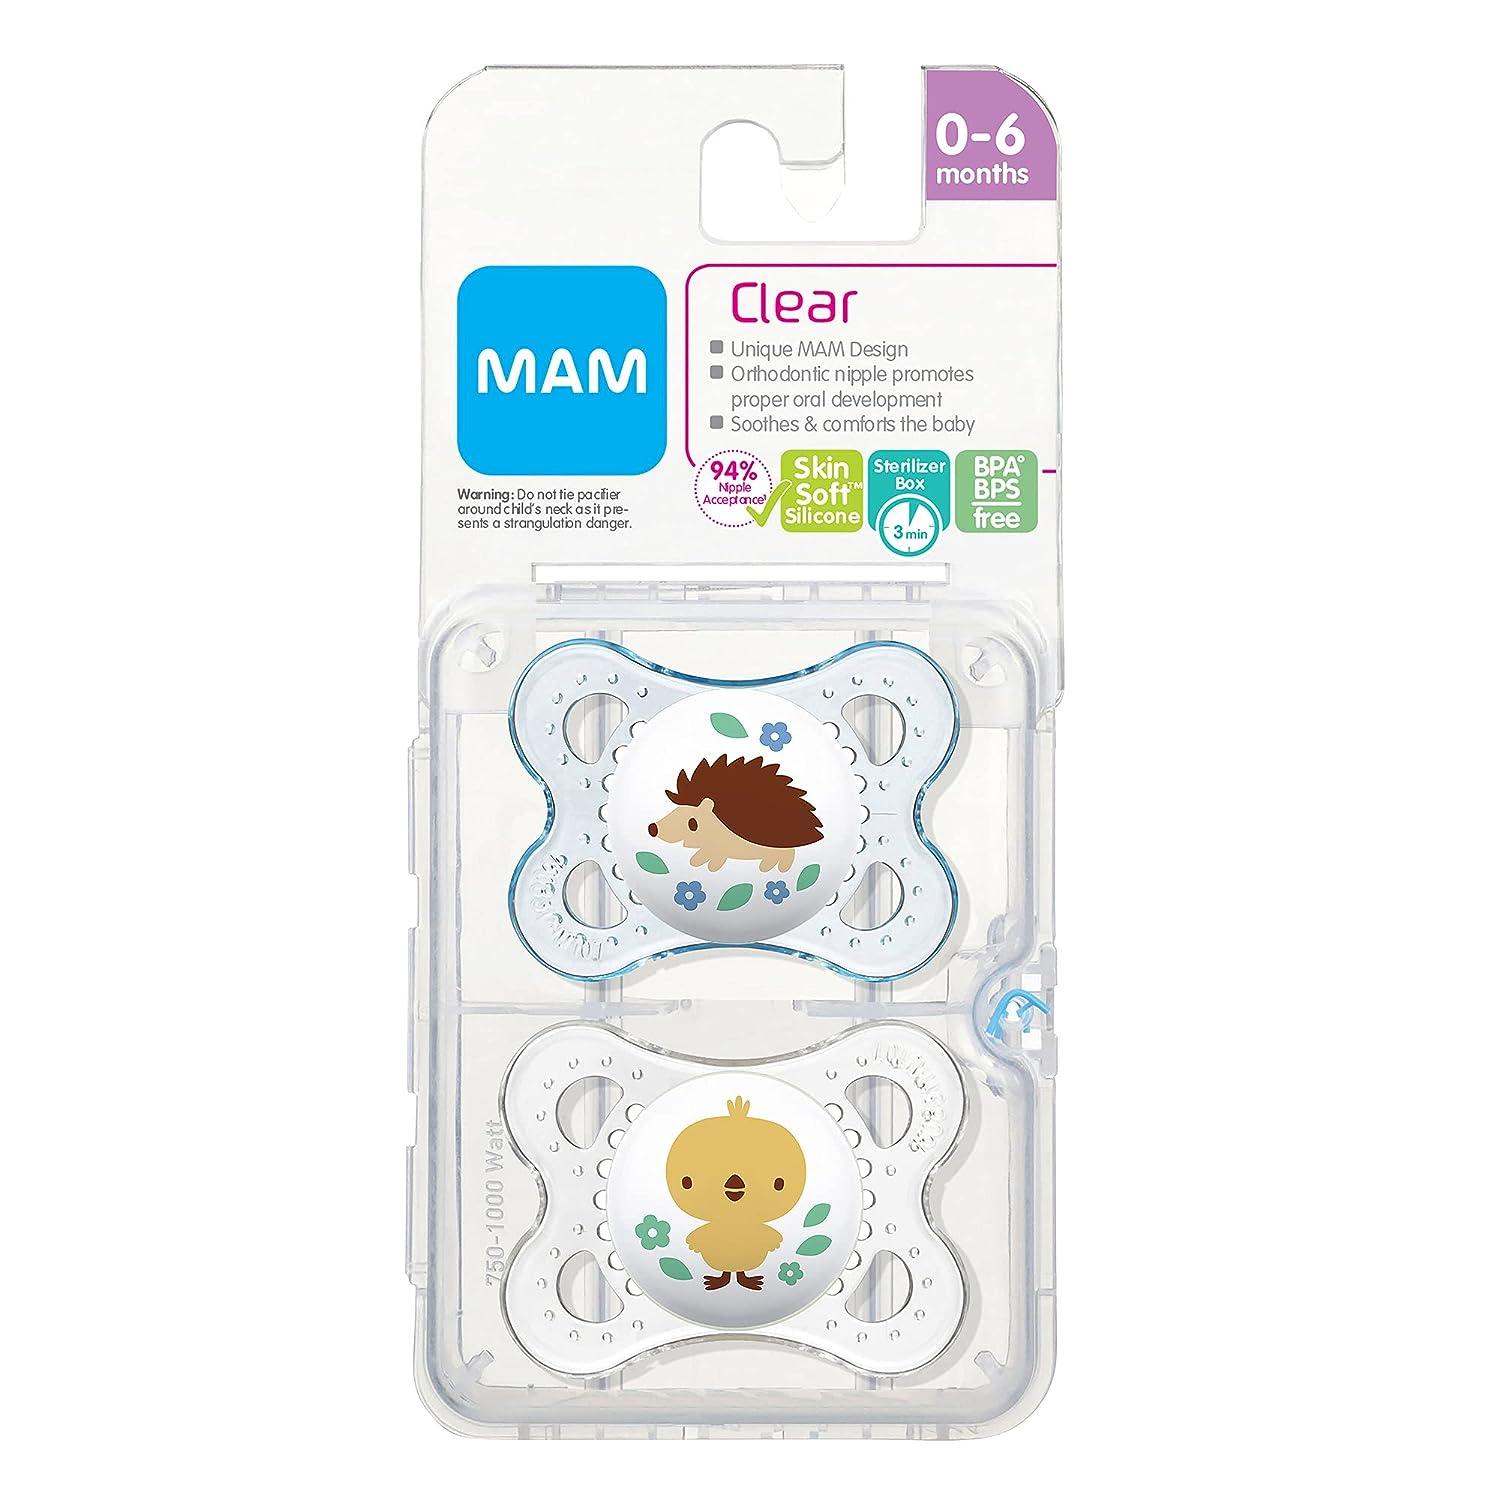  MAM Perfect Baby Pacifier, Patented Nipple, Developed with  Pediatric Dentists & Orthodontists, 1 Pack, 0-6 Months, Boy : Baby  Pacifiers : Baby